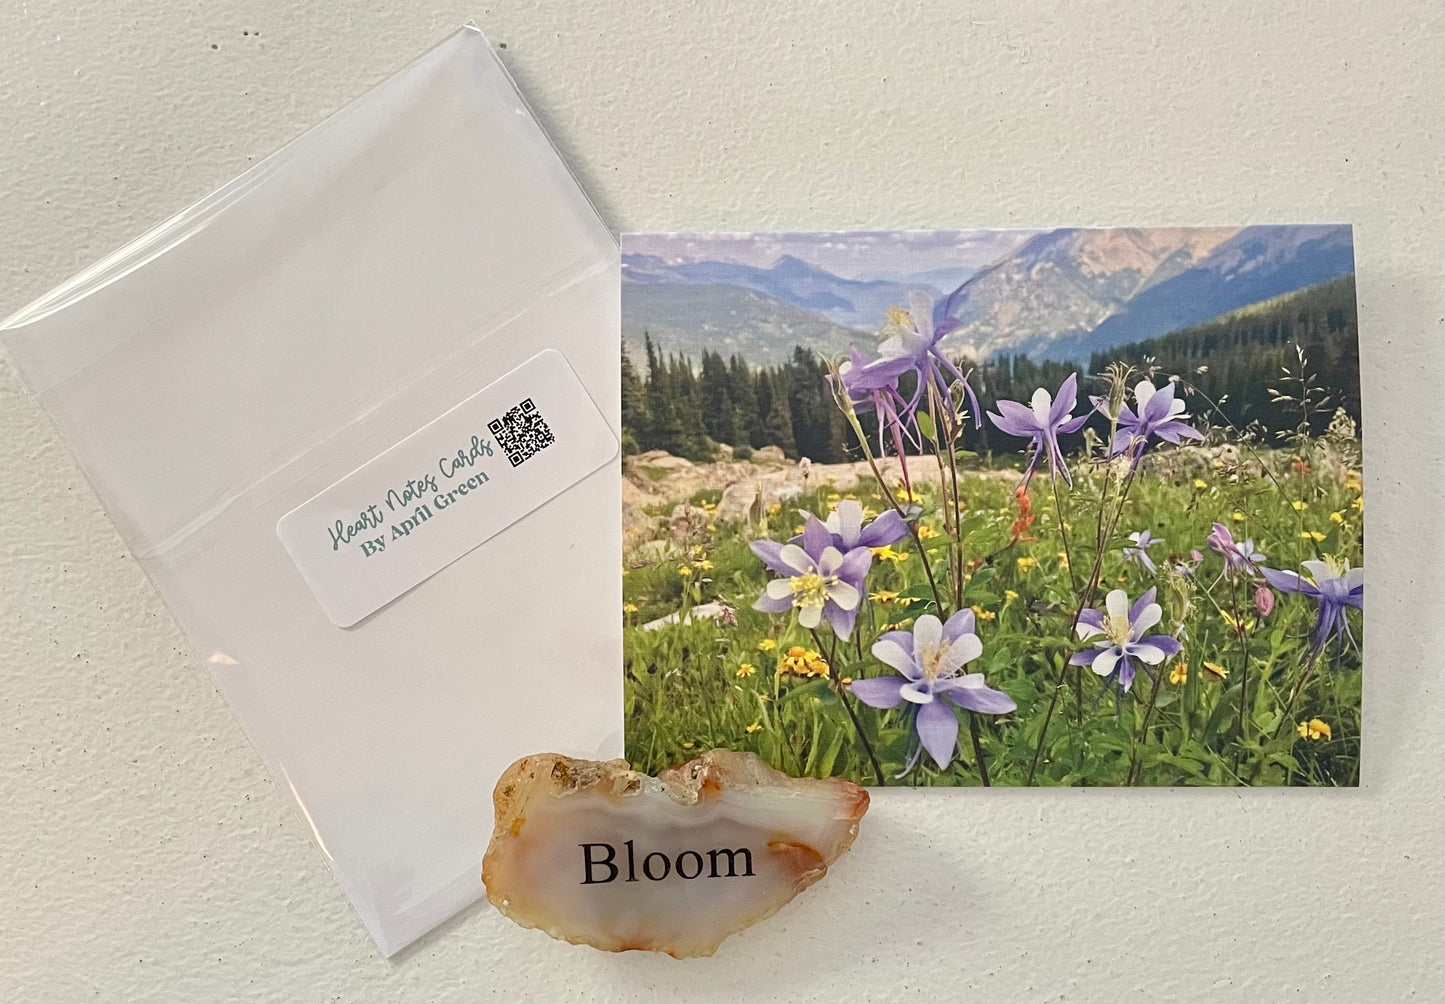 Colorado Columbines Single Nature Original Photography Greeting Card with Traditional White Envelope